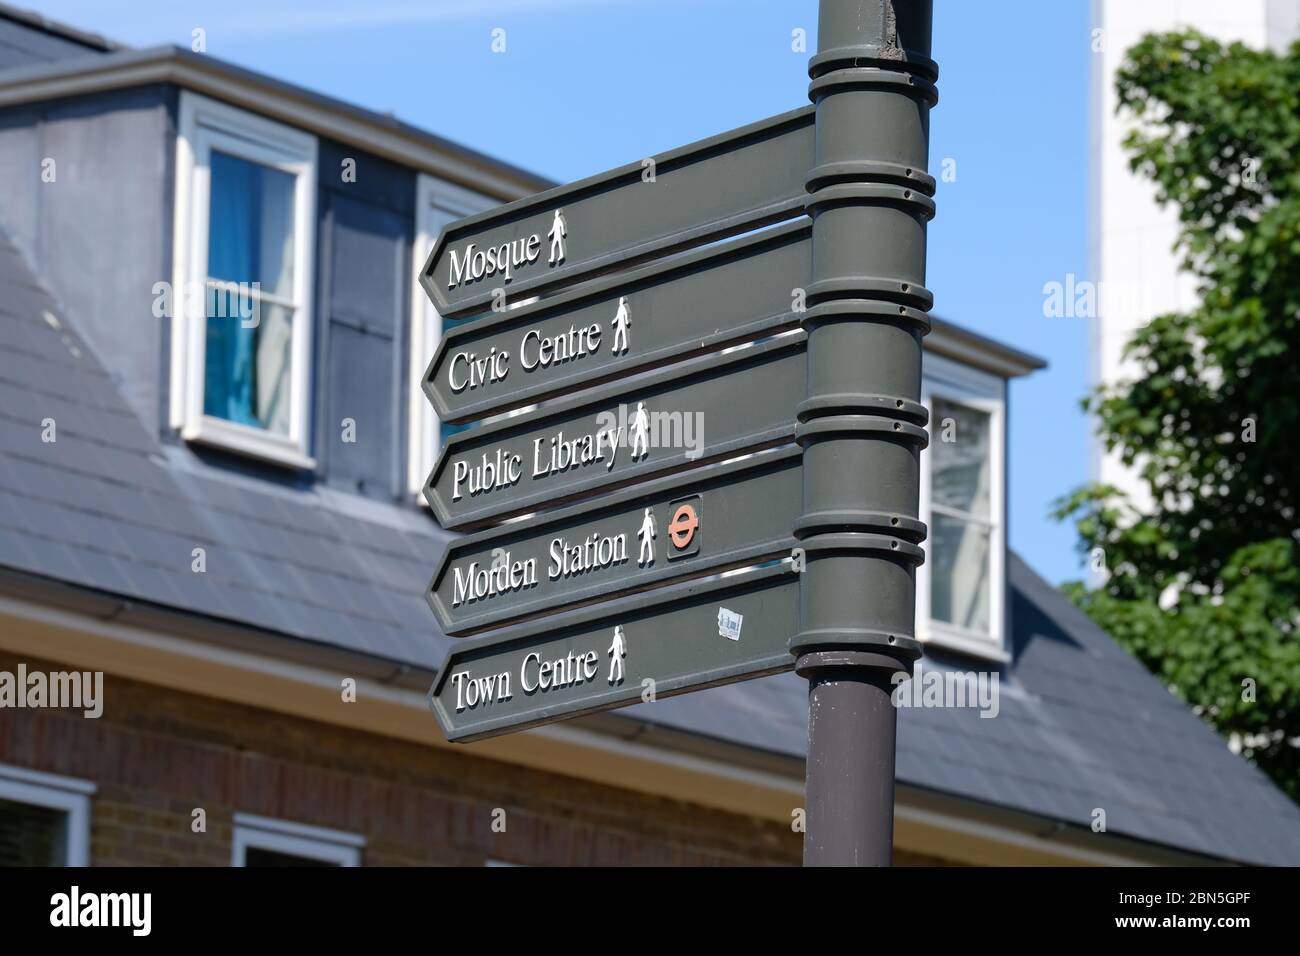 Signpost in Morden, South West London indicating direction of the town centre. Morden is last stop on the southern end on the Northern line. Stock Photo